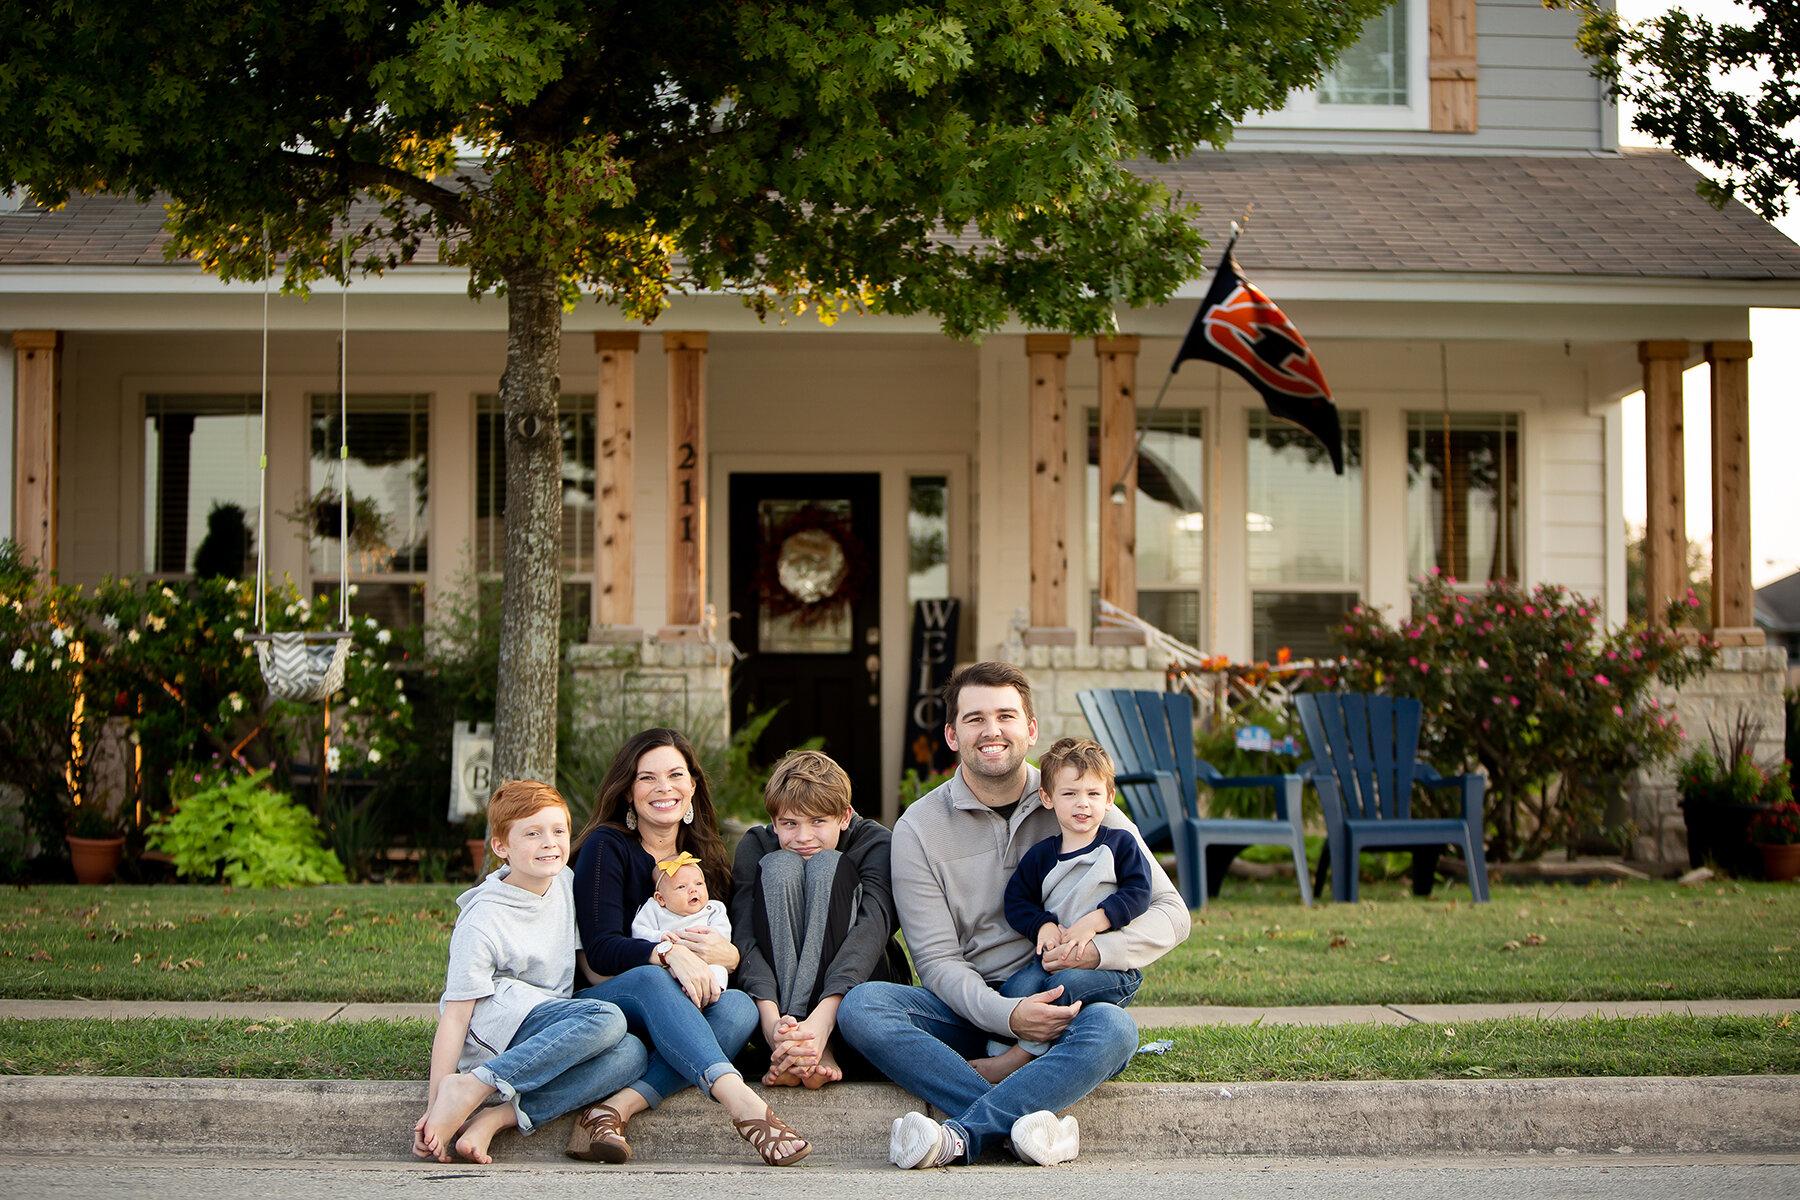 Family of 5 citting on the curb in front of their home in Austin, Tx